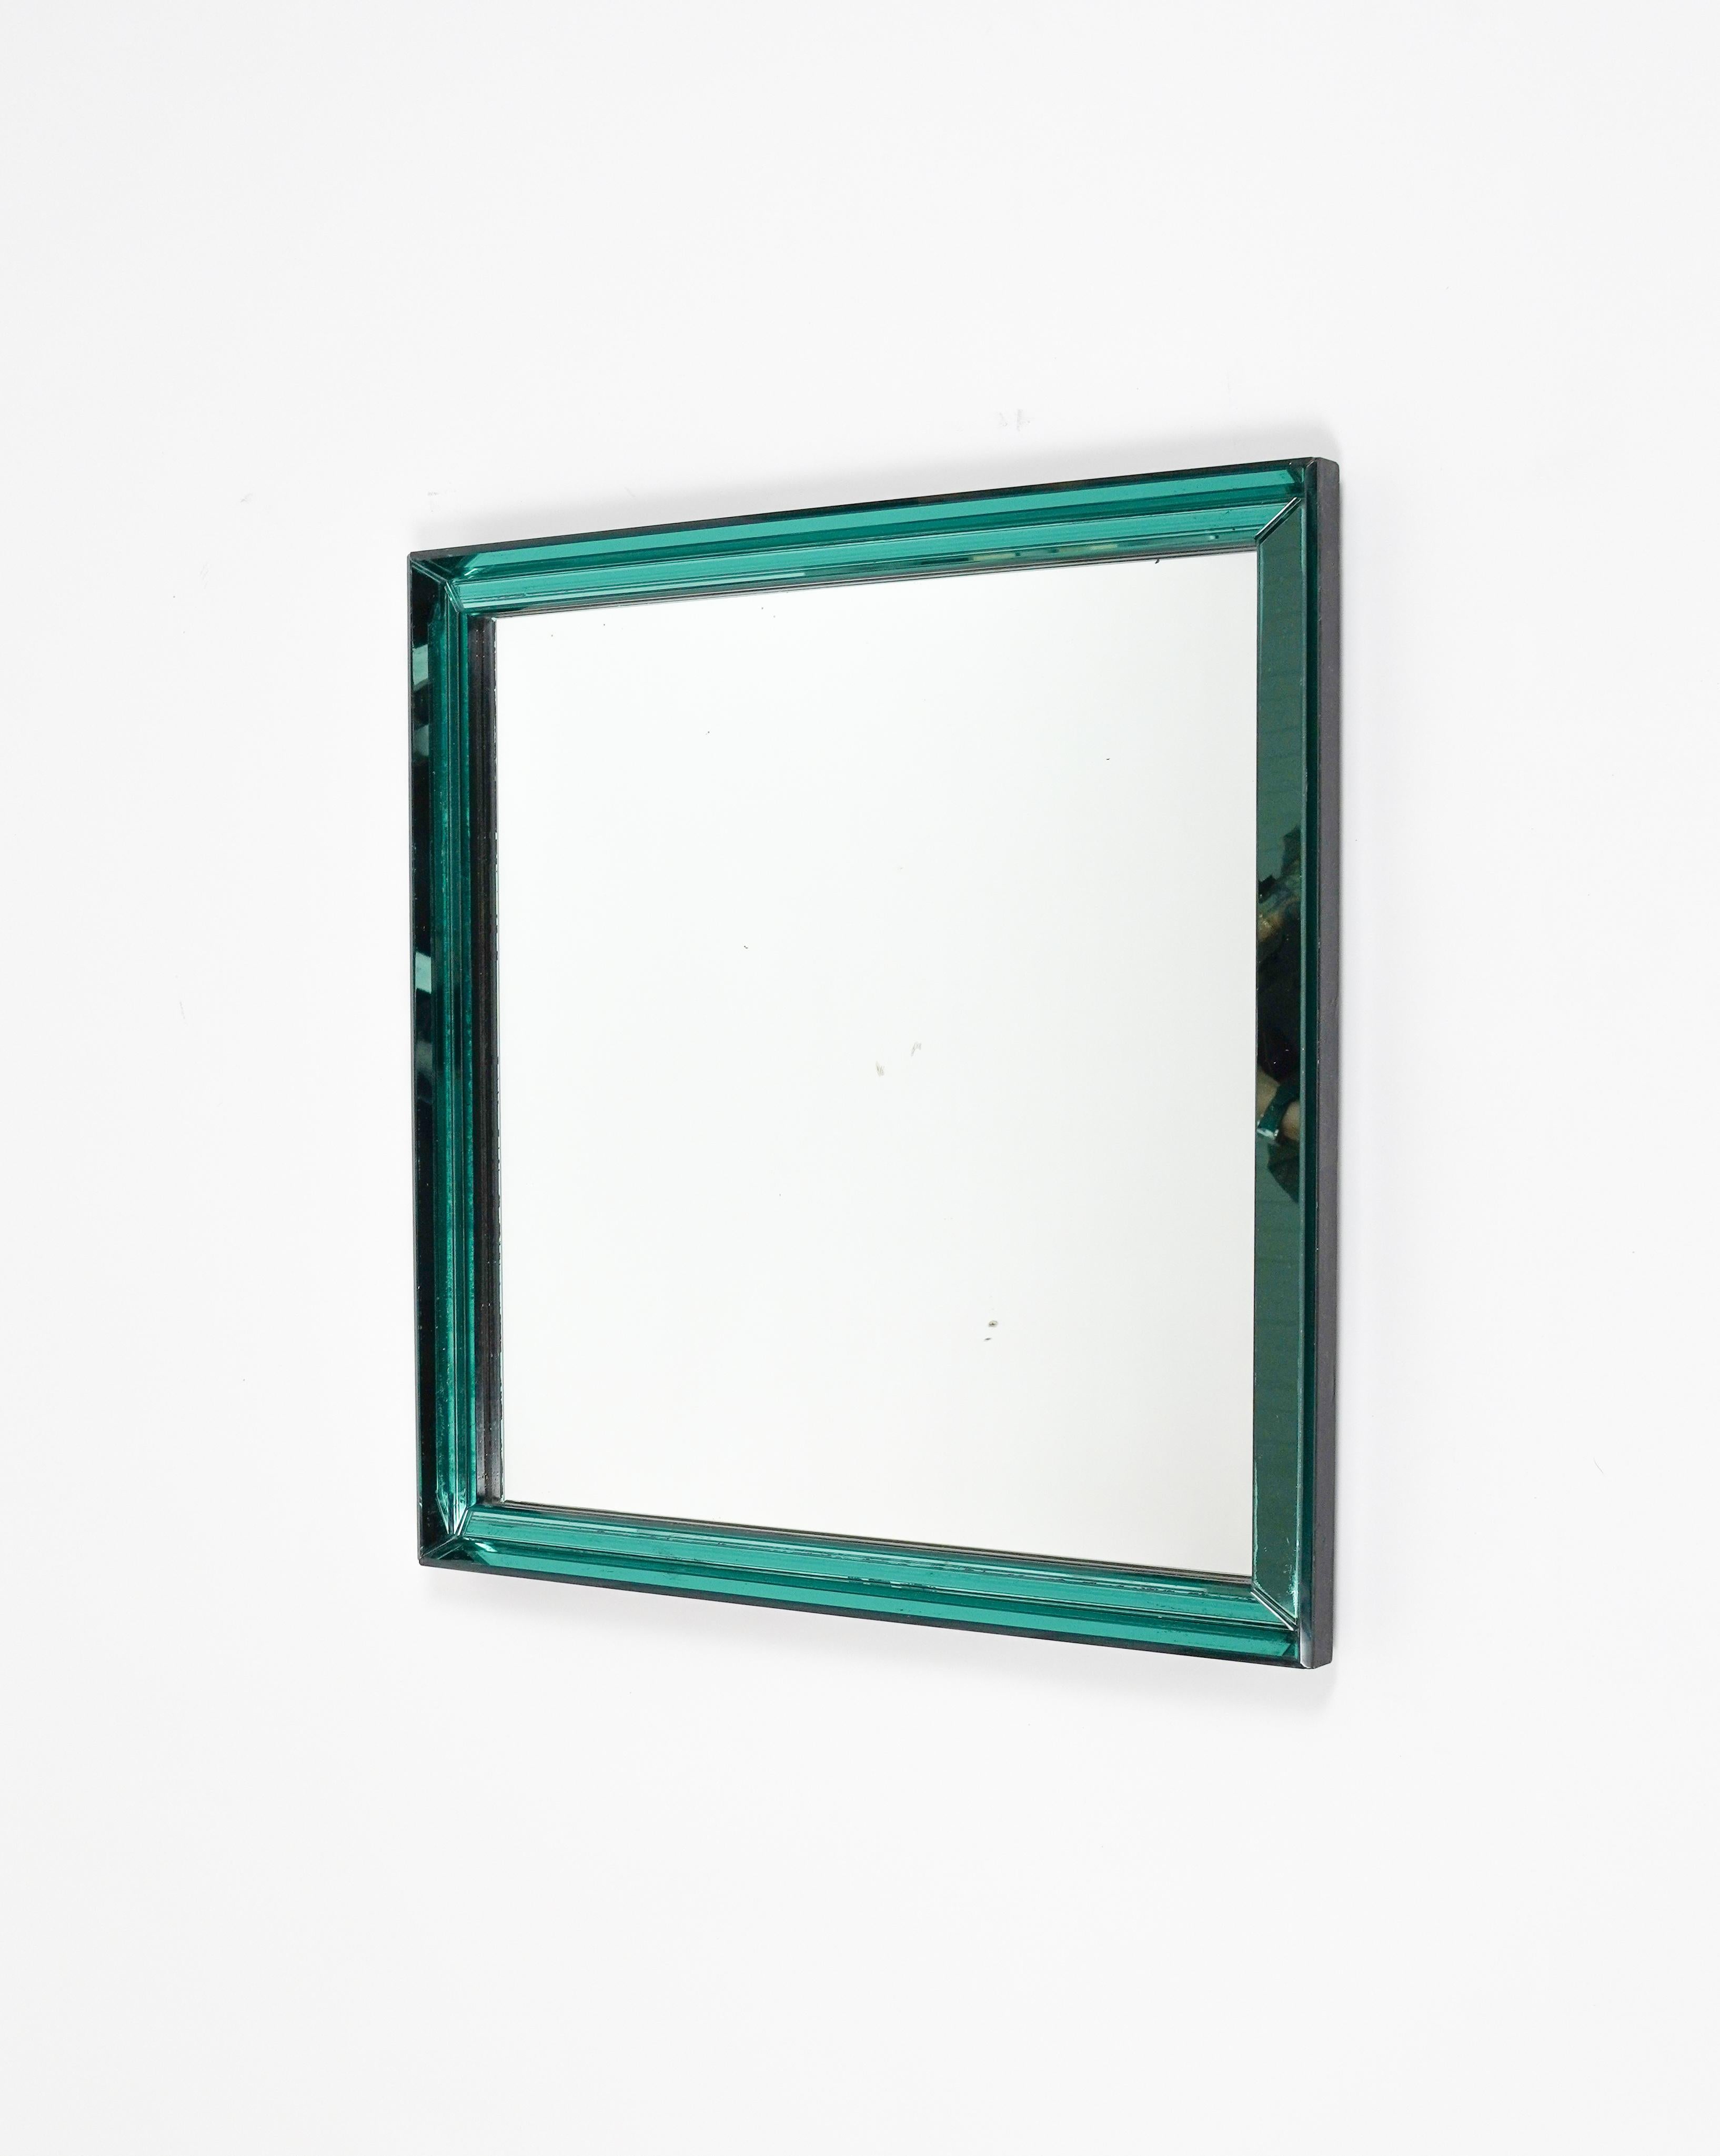 Mid-20th Century Midcentury Squared Wall Mirror by Max Ingrand for Fontana Arte, Italy 1960s For Sale